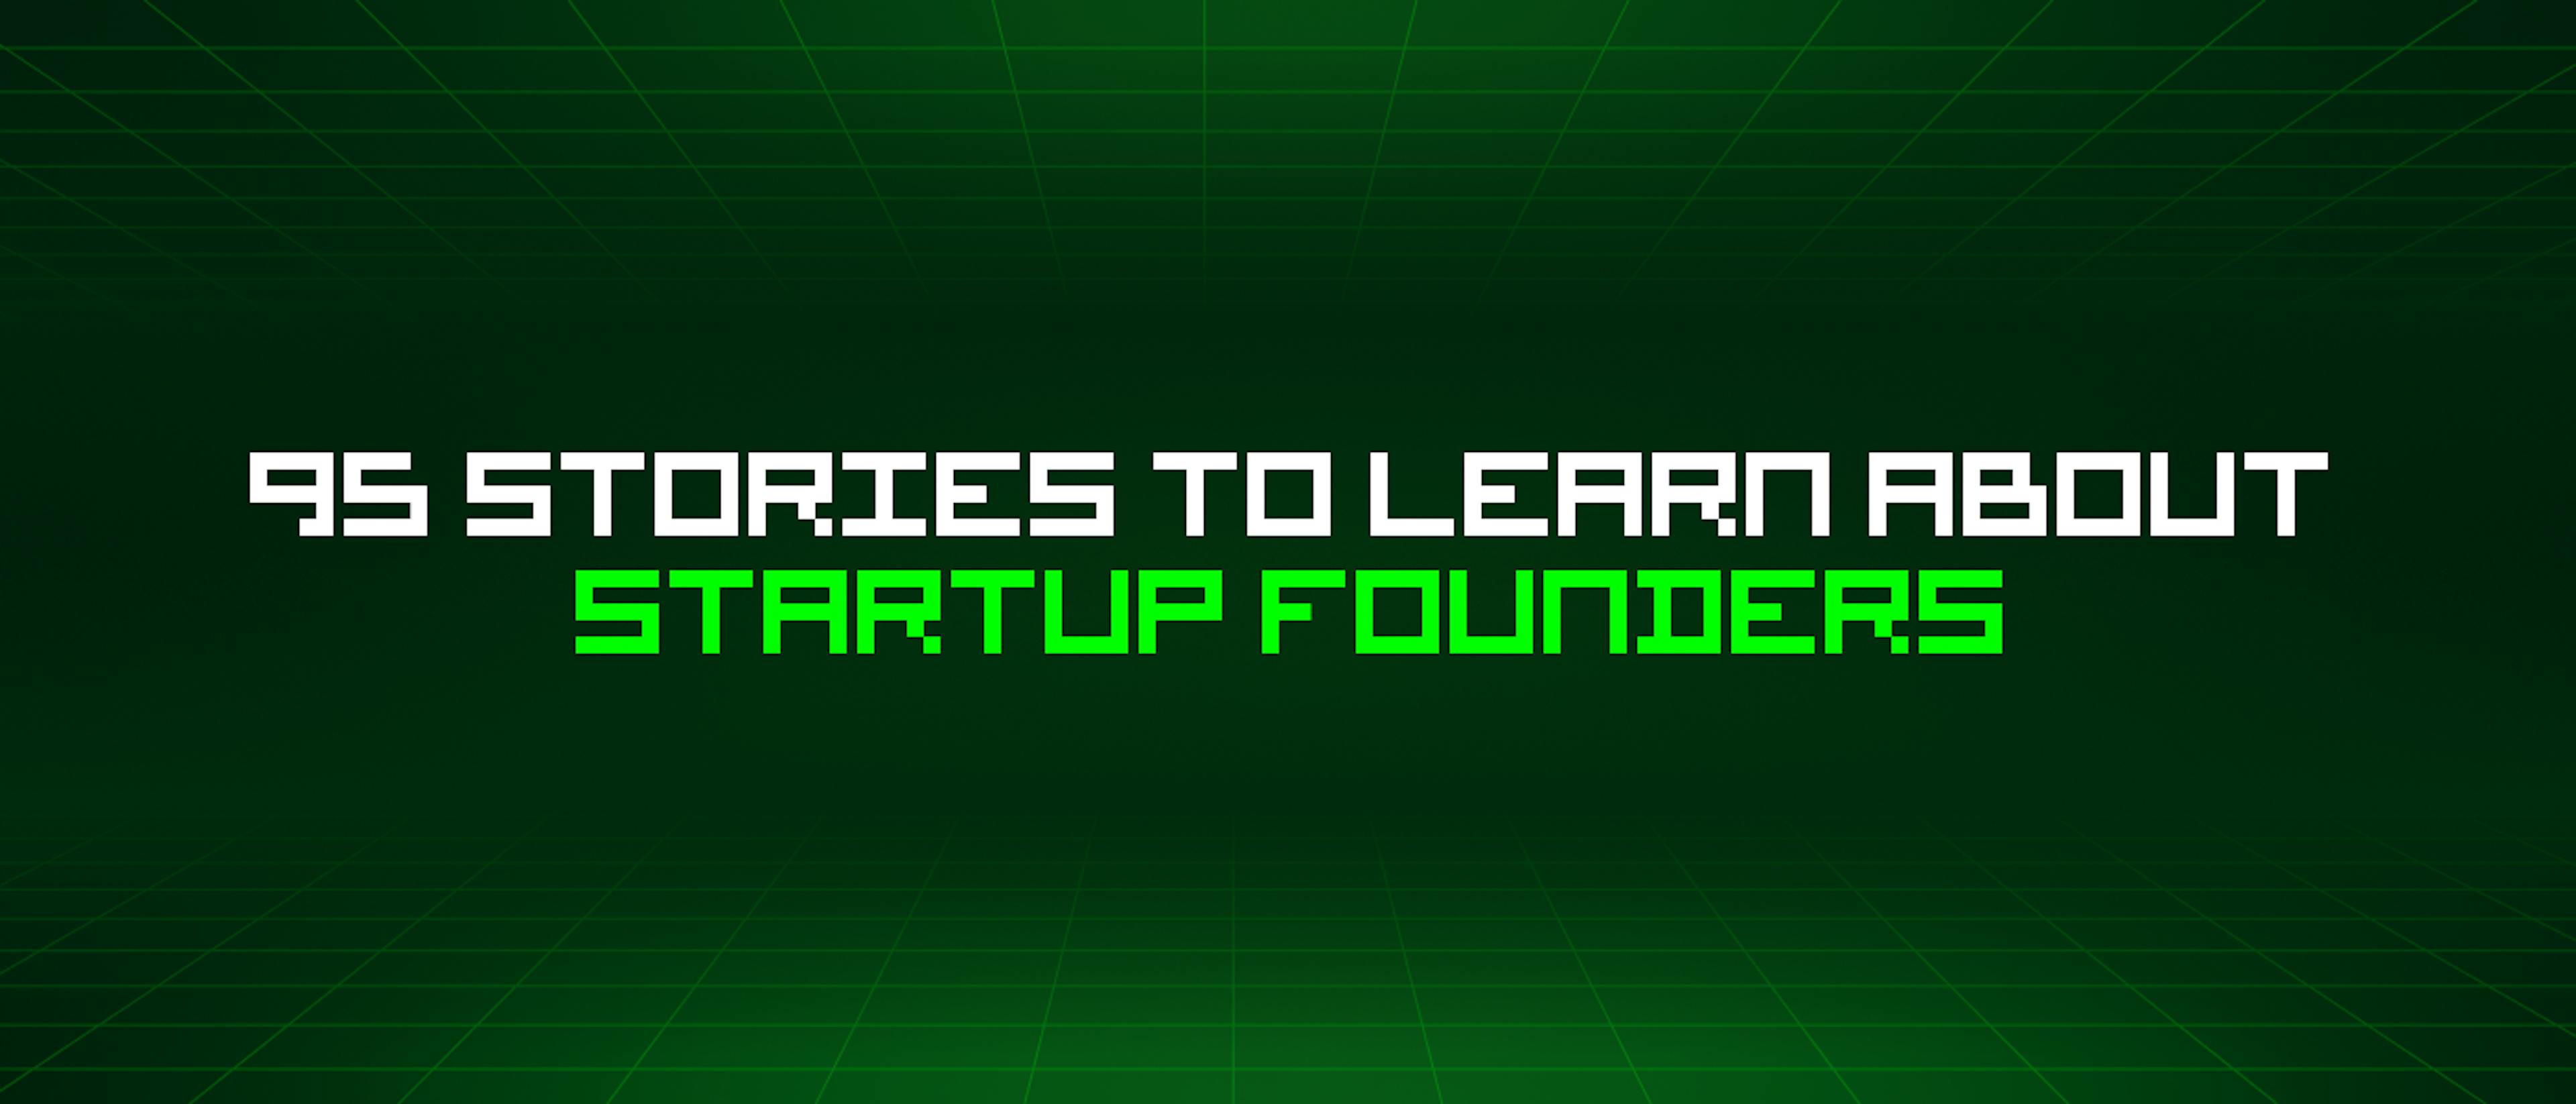 featured image - 95 Stories To Learn About Startup Founders